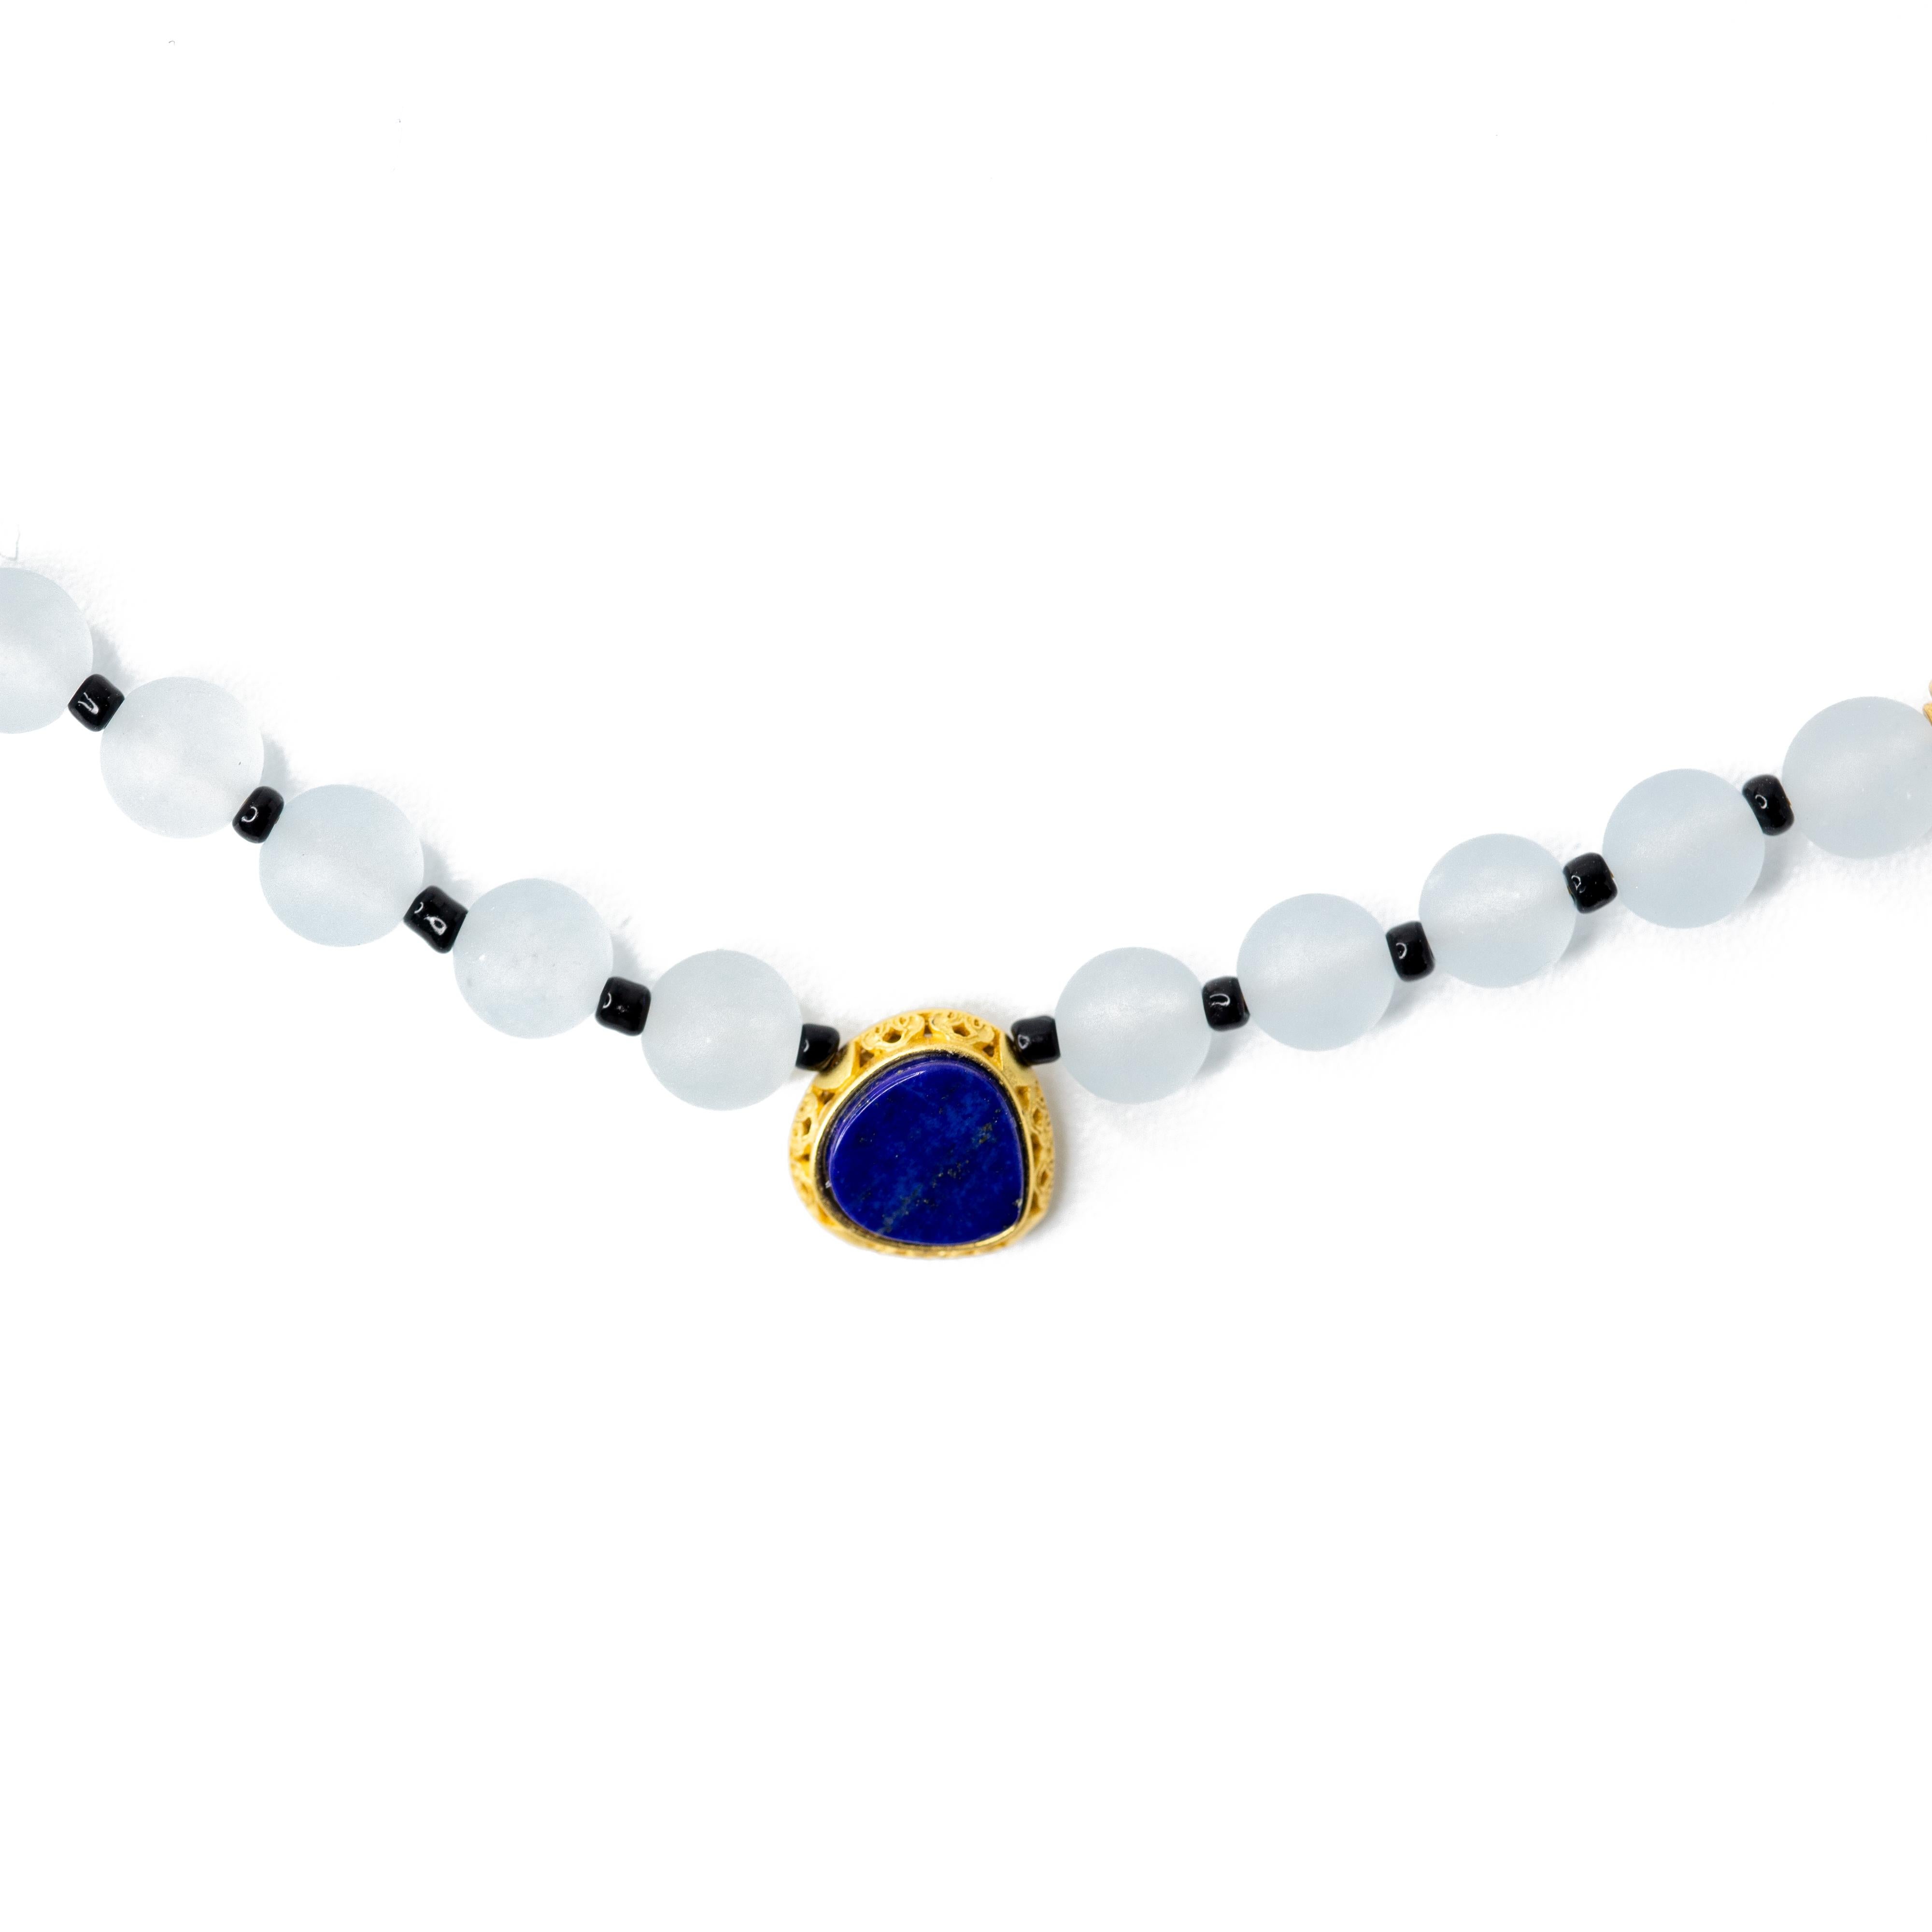 Women's Lapis Lazuli, Chalcedony, Gold Beaded Necklace - by Bombyx House For Sale